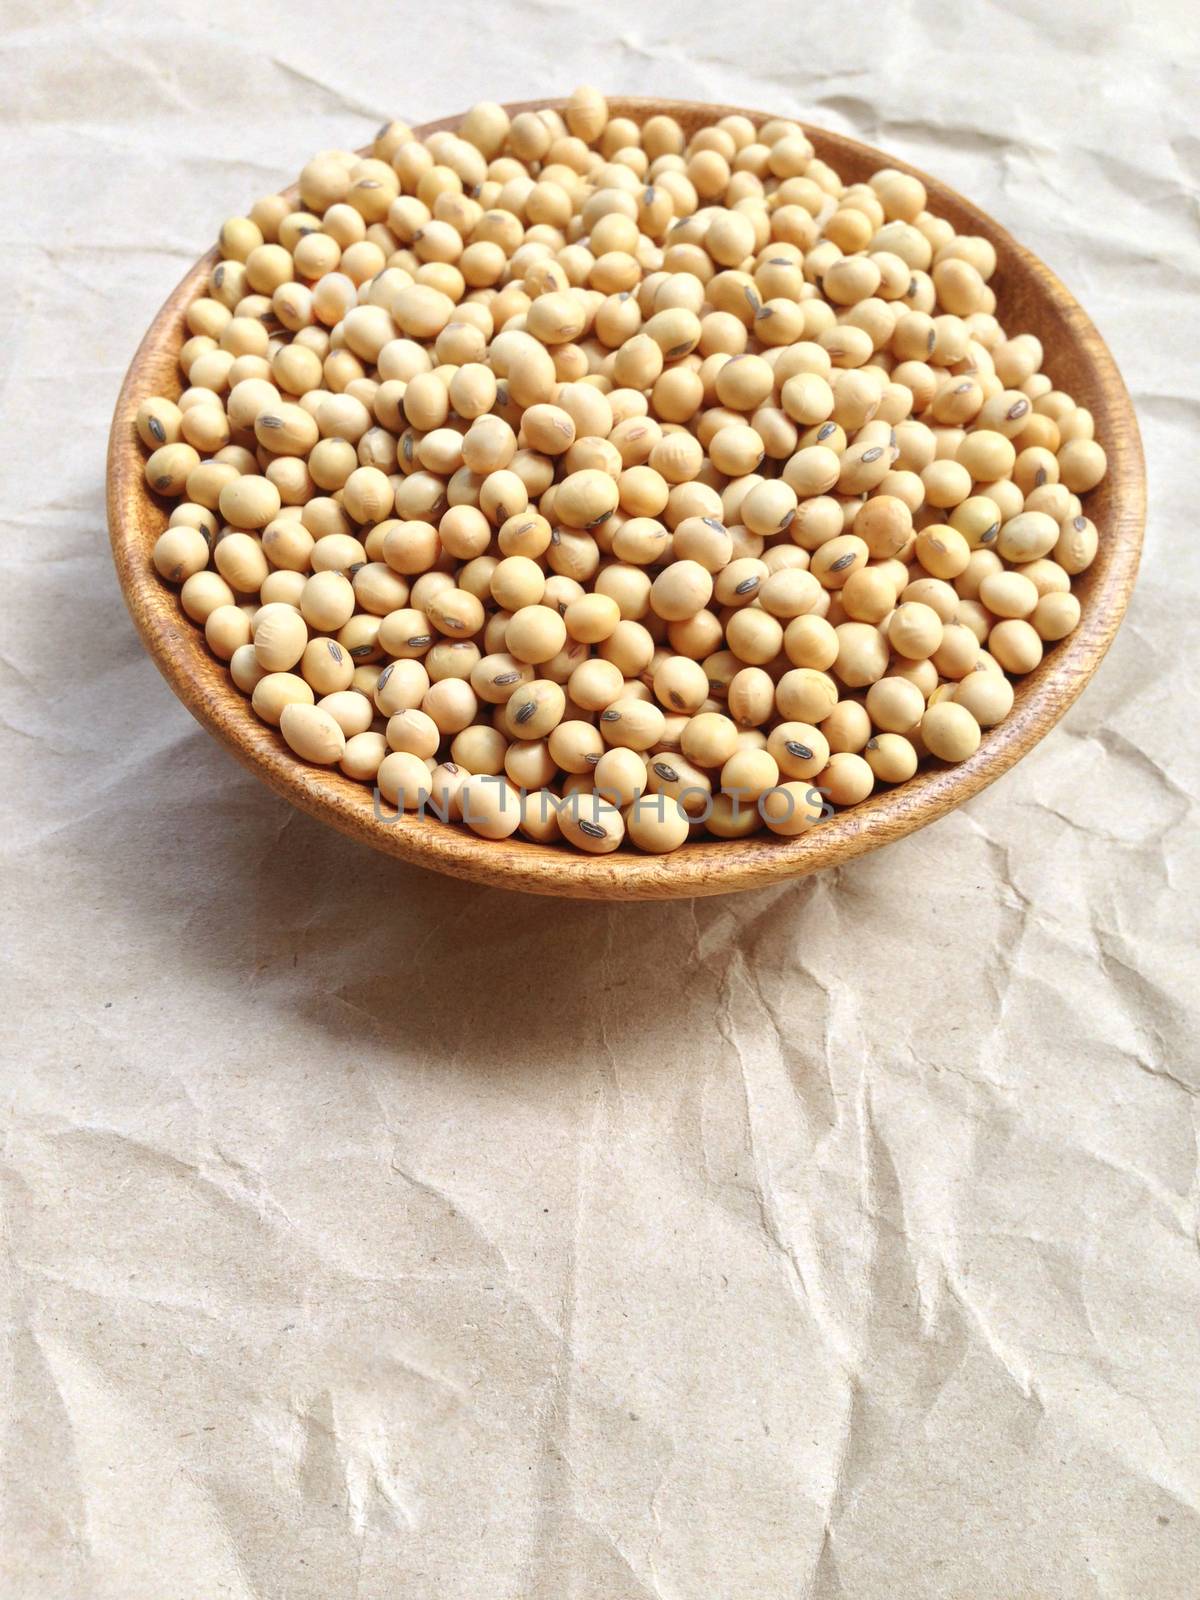 Soy beans in wooden bowl on brown crumpled paper  by Bowonpat